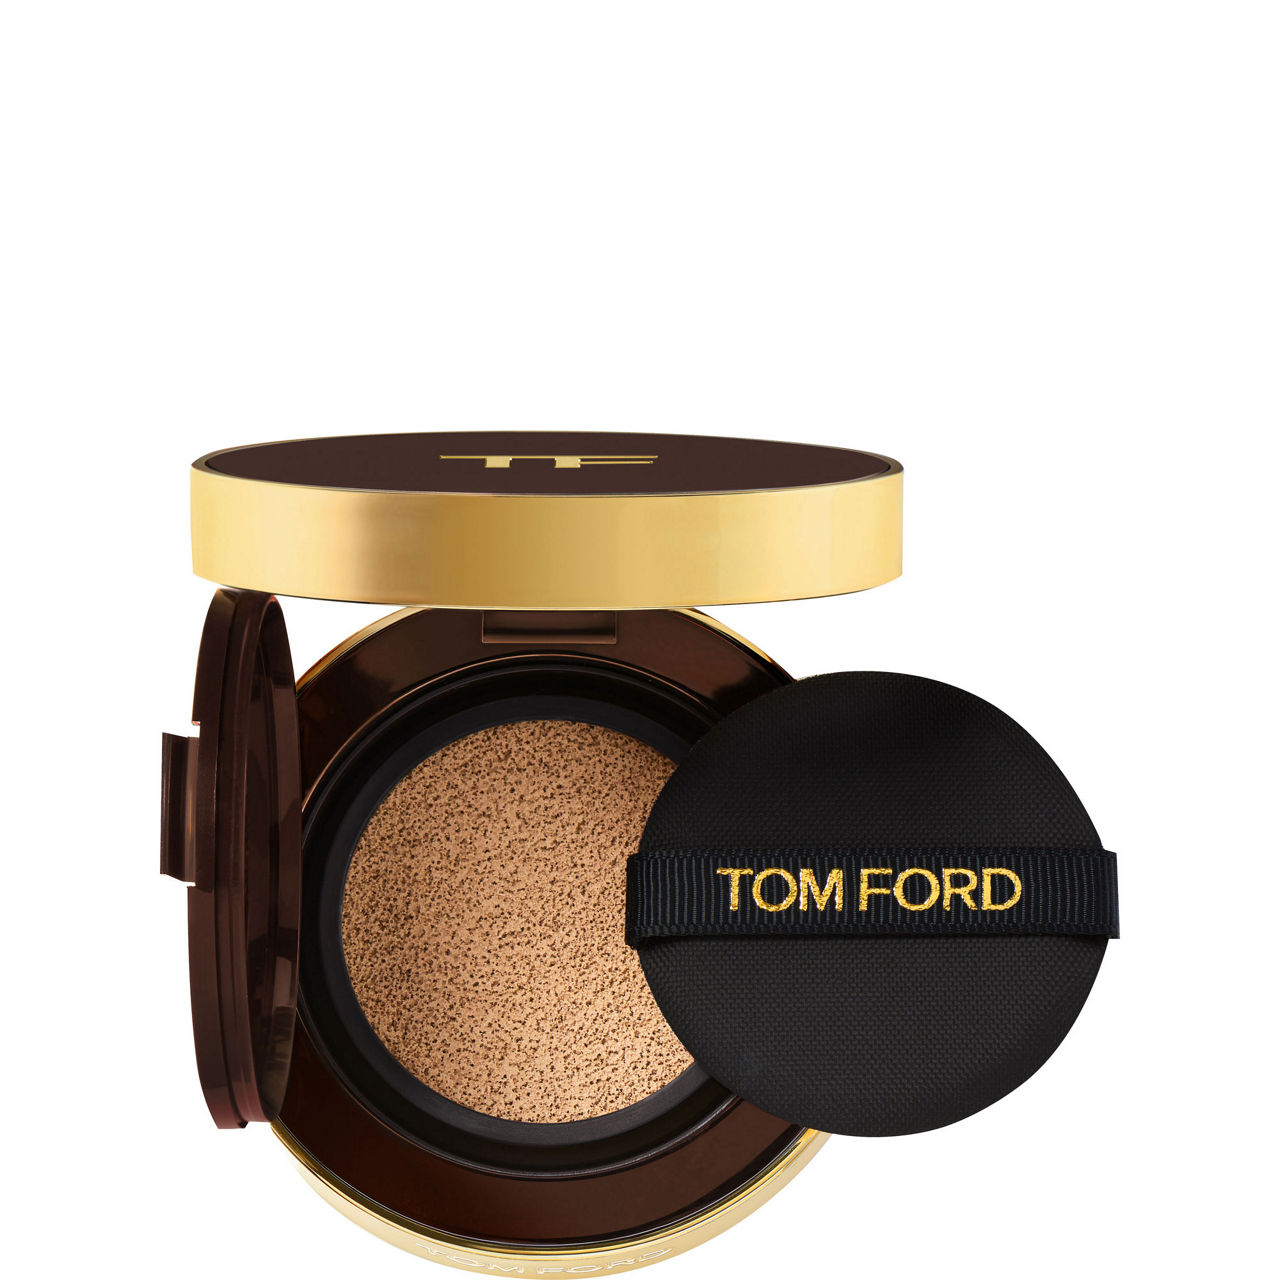 Tom Ford - Make up & Fragrance Specialist - Brown Thomas - 22.5